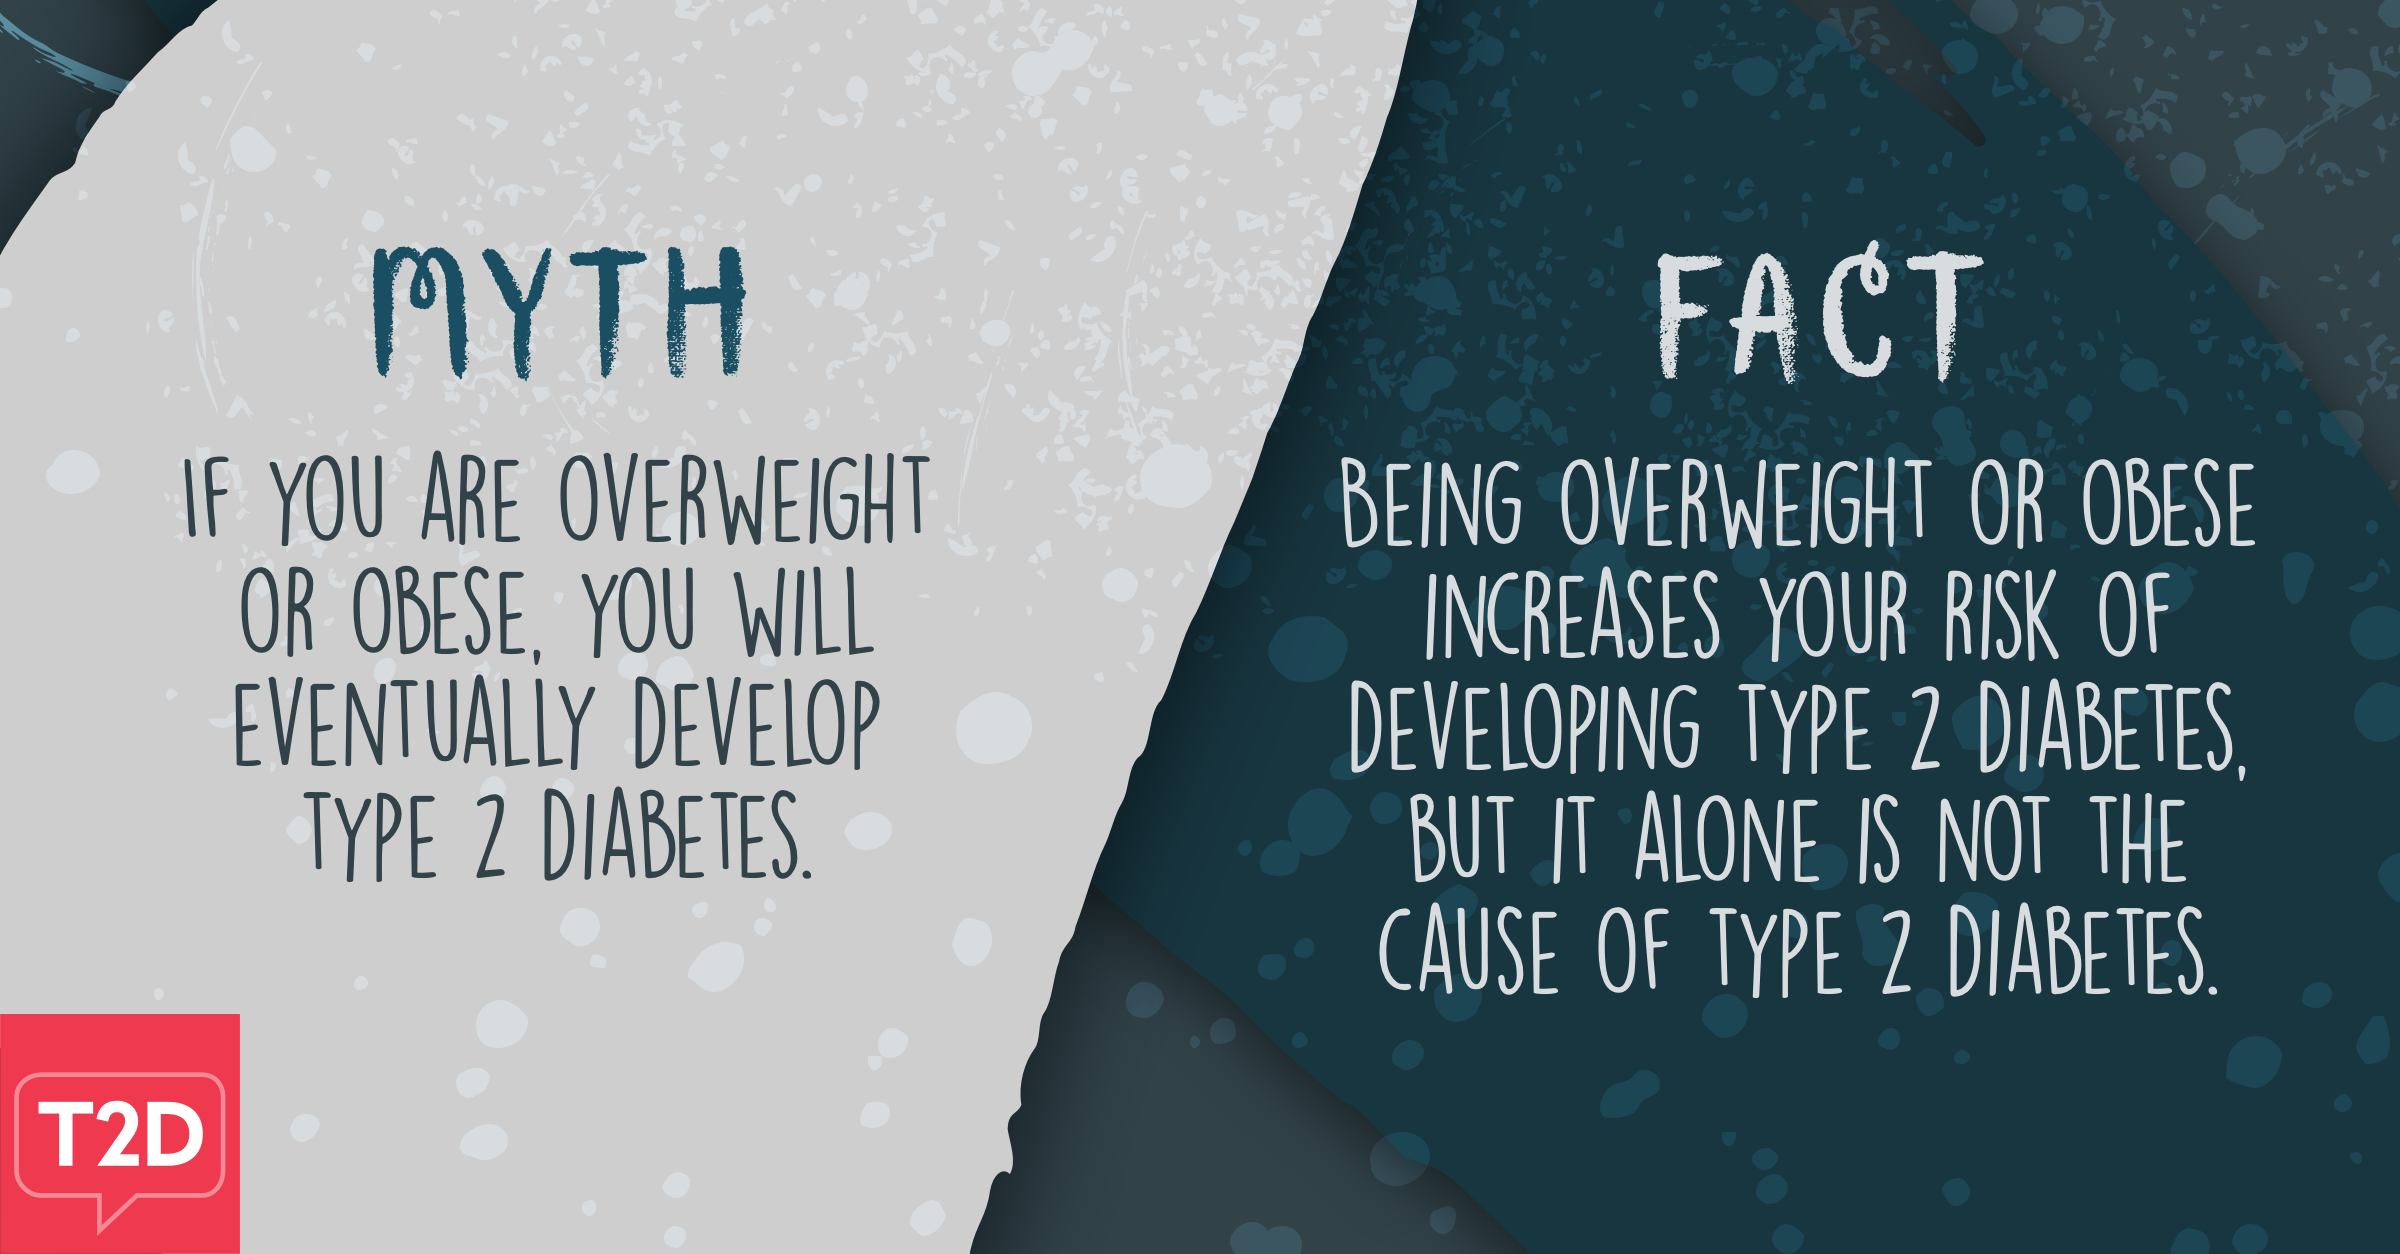 Myth: If you are overweight or obese, you will eventually develop type 2 diabetes. Fact: Being overweight or obese increases your risk of developing type 2 diabetes, but it alone is not the cause of type 2 diabetes. 